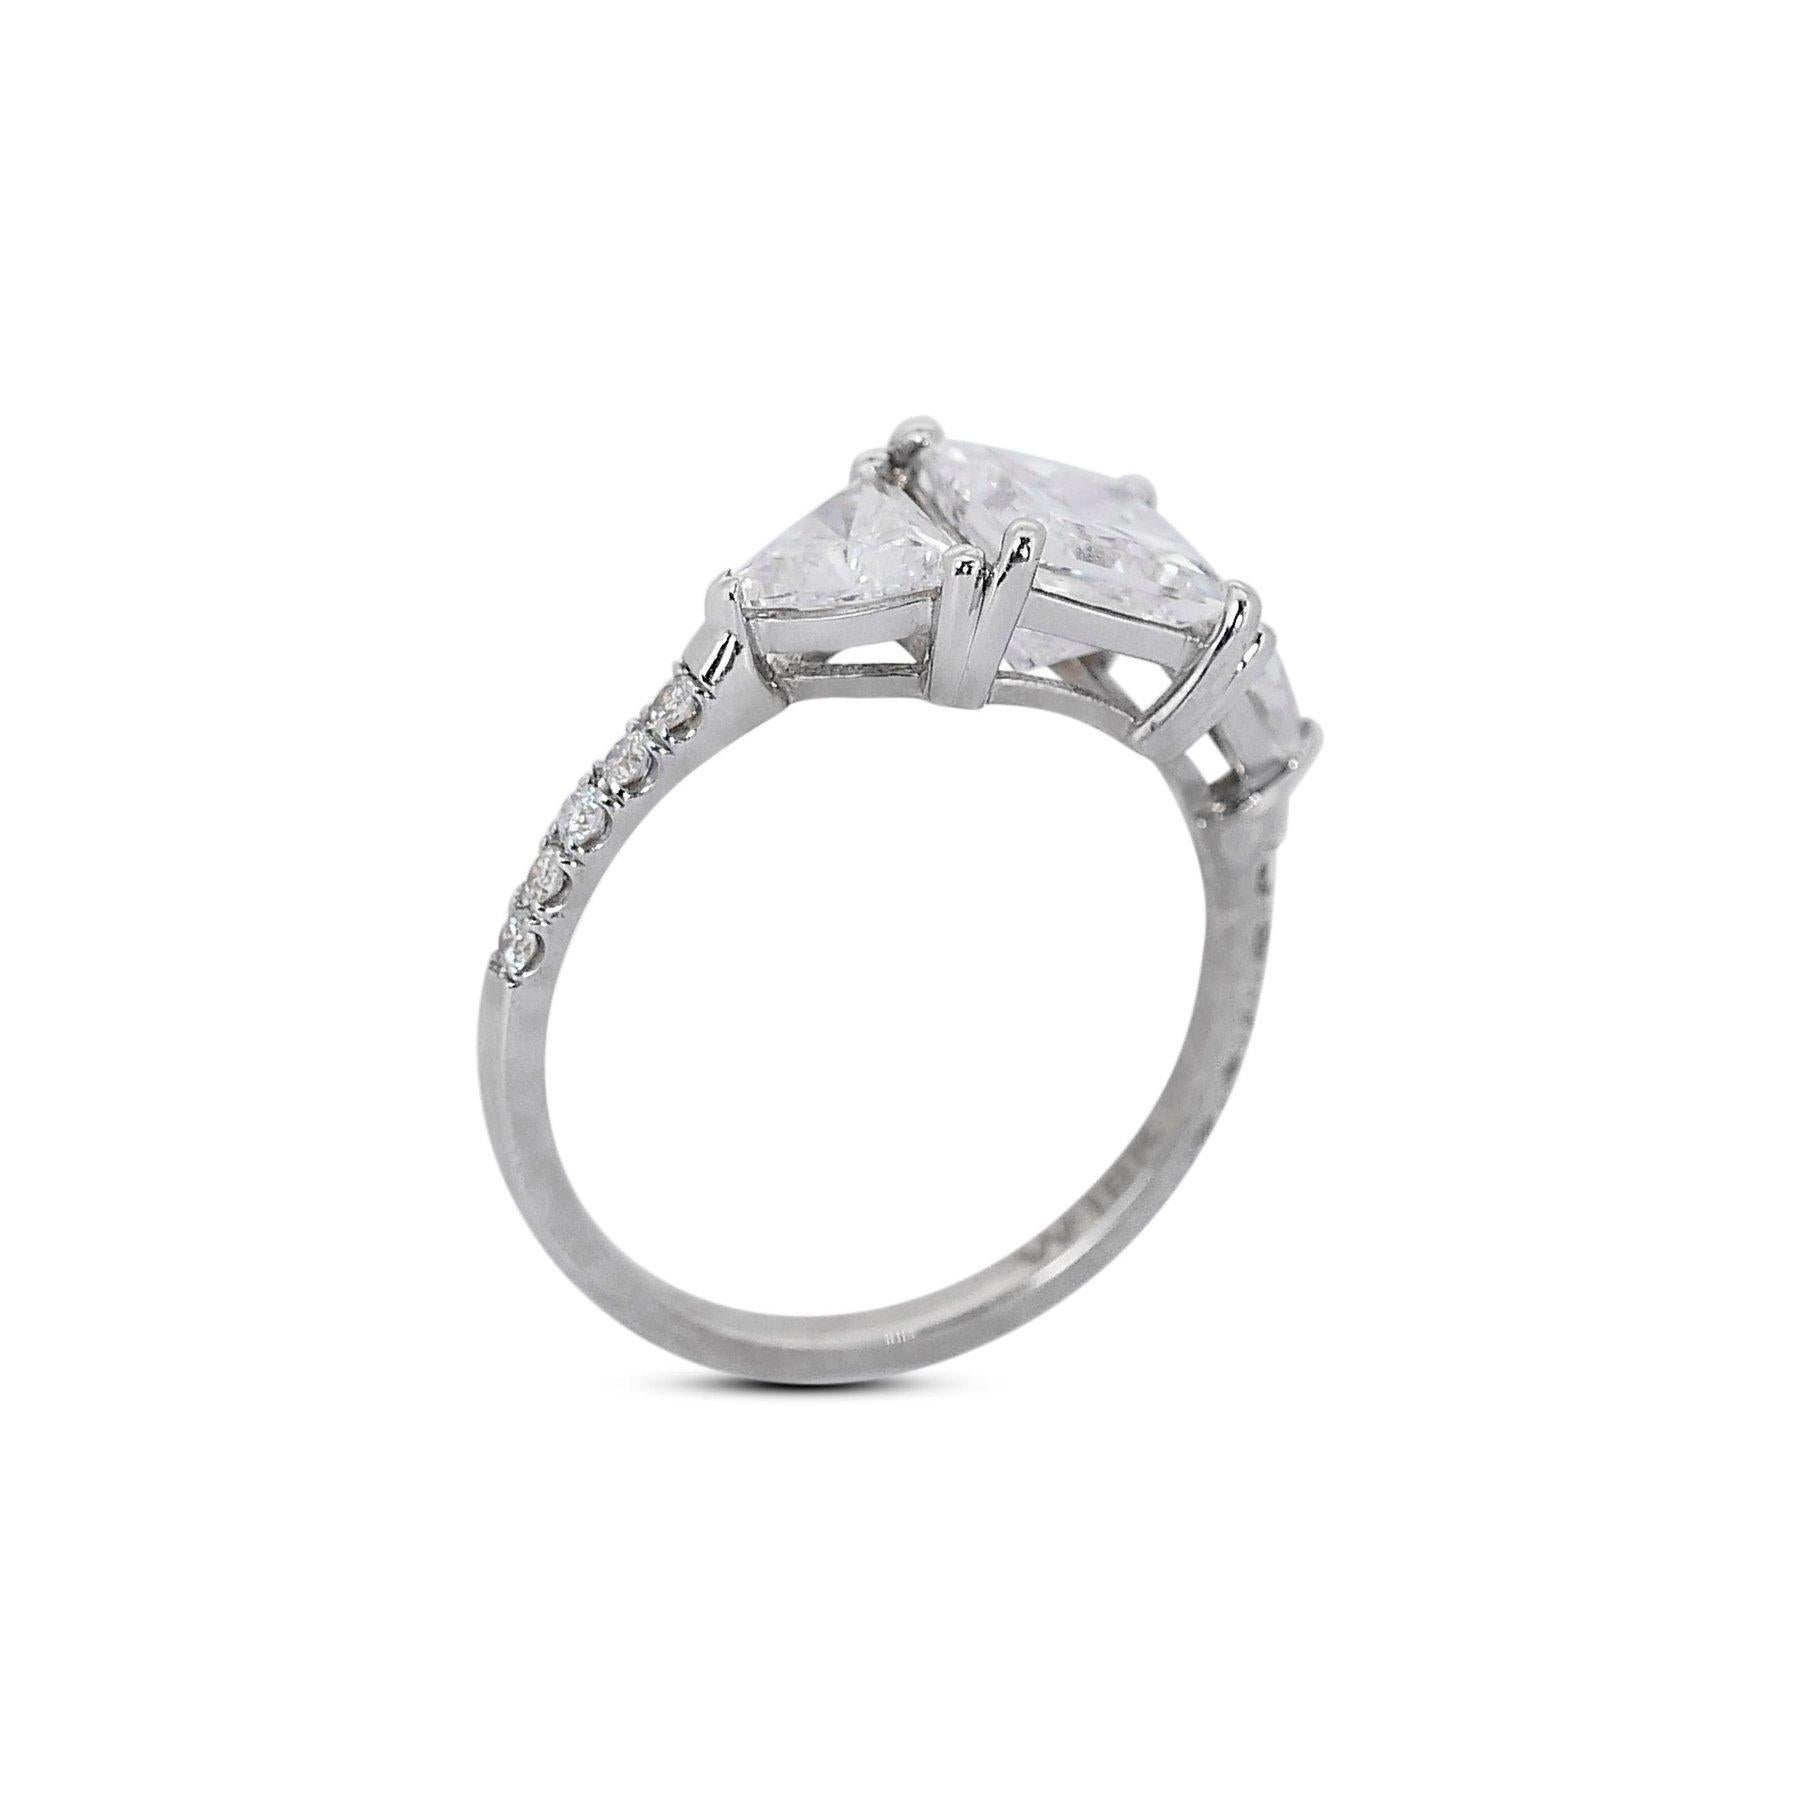 Luminous 2.59ct Diamonds 3-Stone Ring in 18k White Gold - GIA Certified In New Condition For Sale In רמת גן, IL